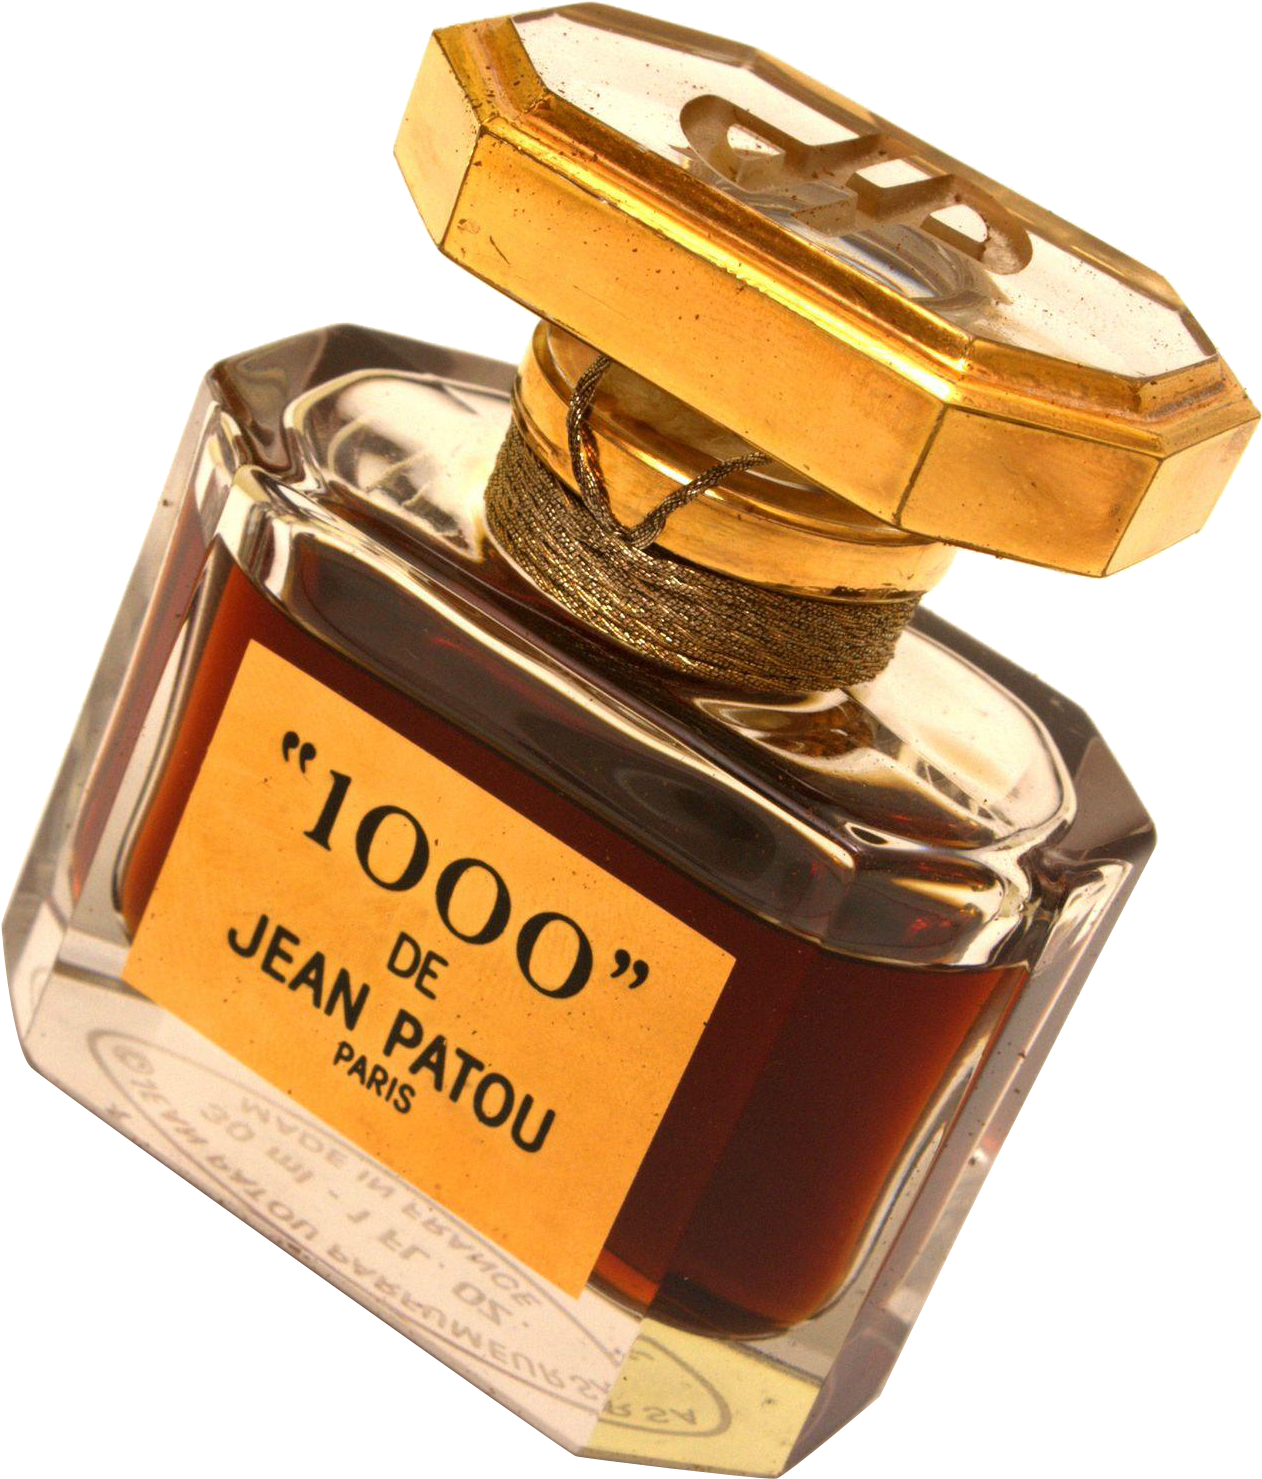 A Bottle Of Perfume With A Gold Cap